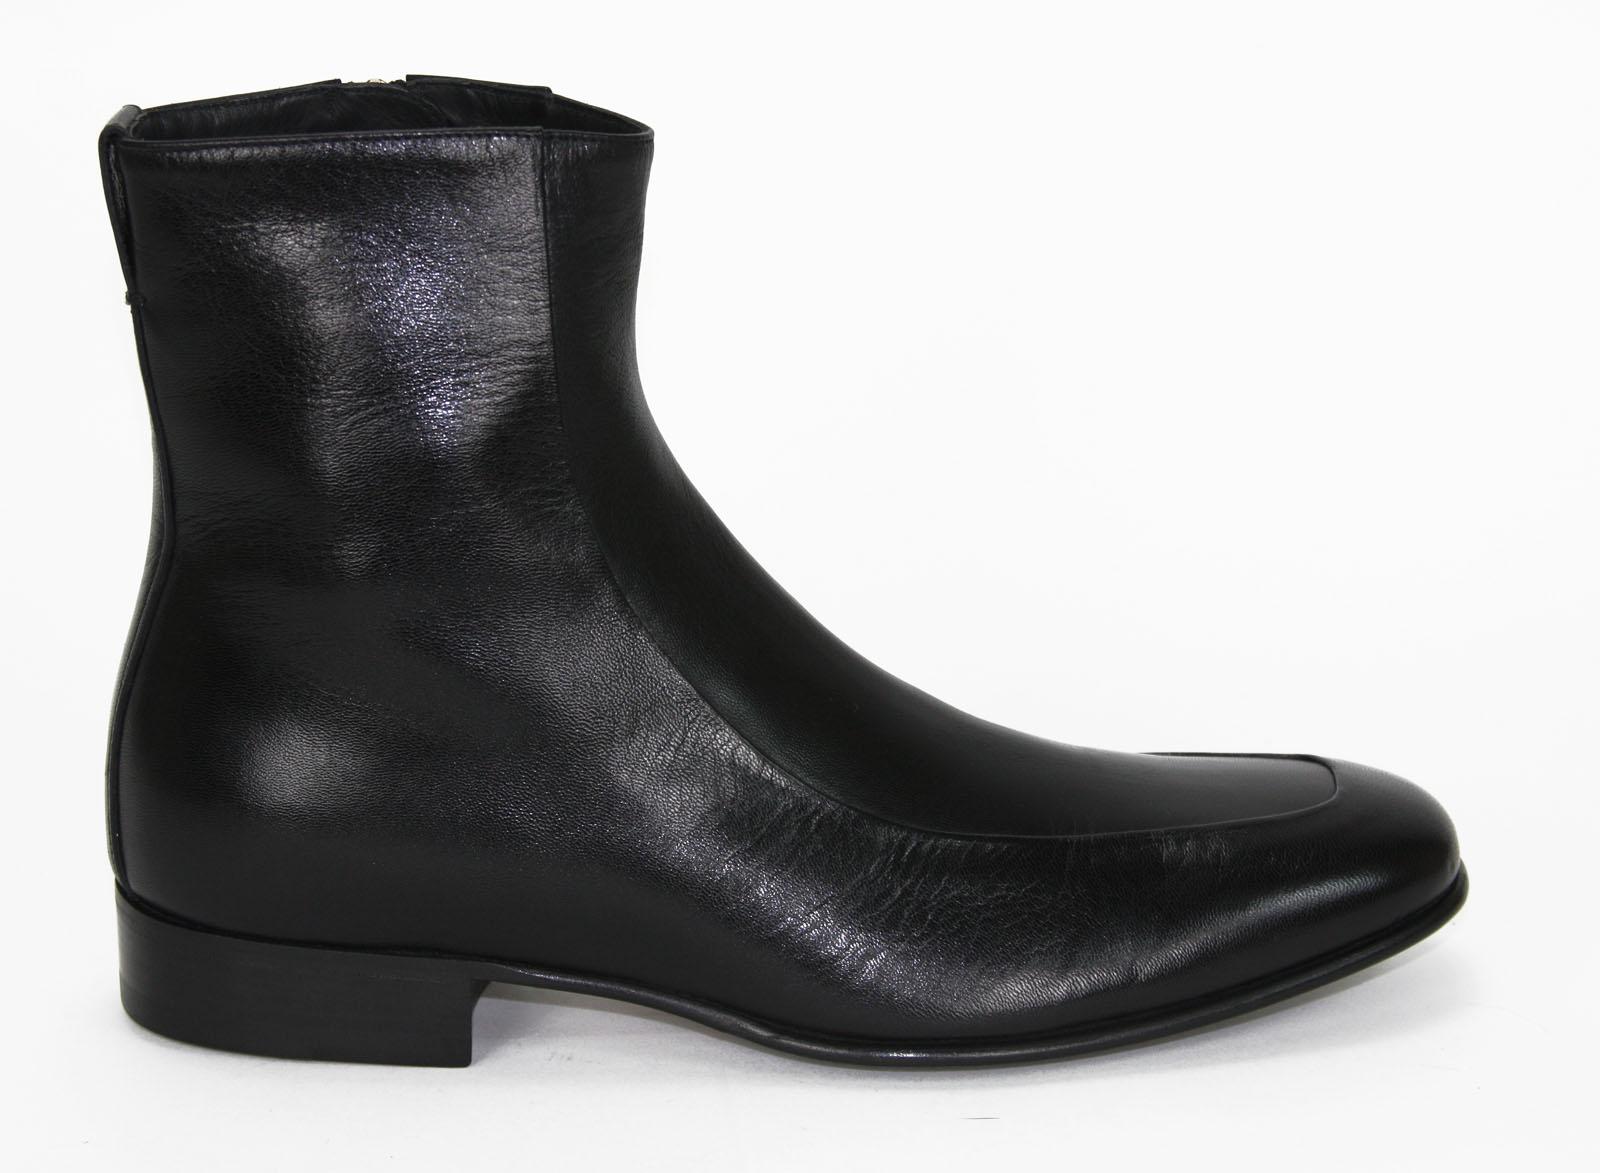 New Tom Ford Men's Black Ankle Dress Boots
Designer size - 9
Black Kid Goat Leather, Side Zip Closure, Gold-tone Hardware with Designer Logo, Leather Sole.
Made in Italy
New with box.